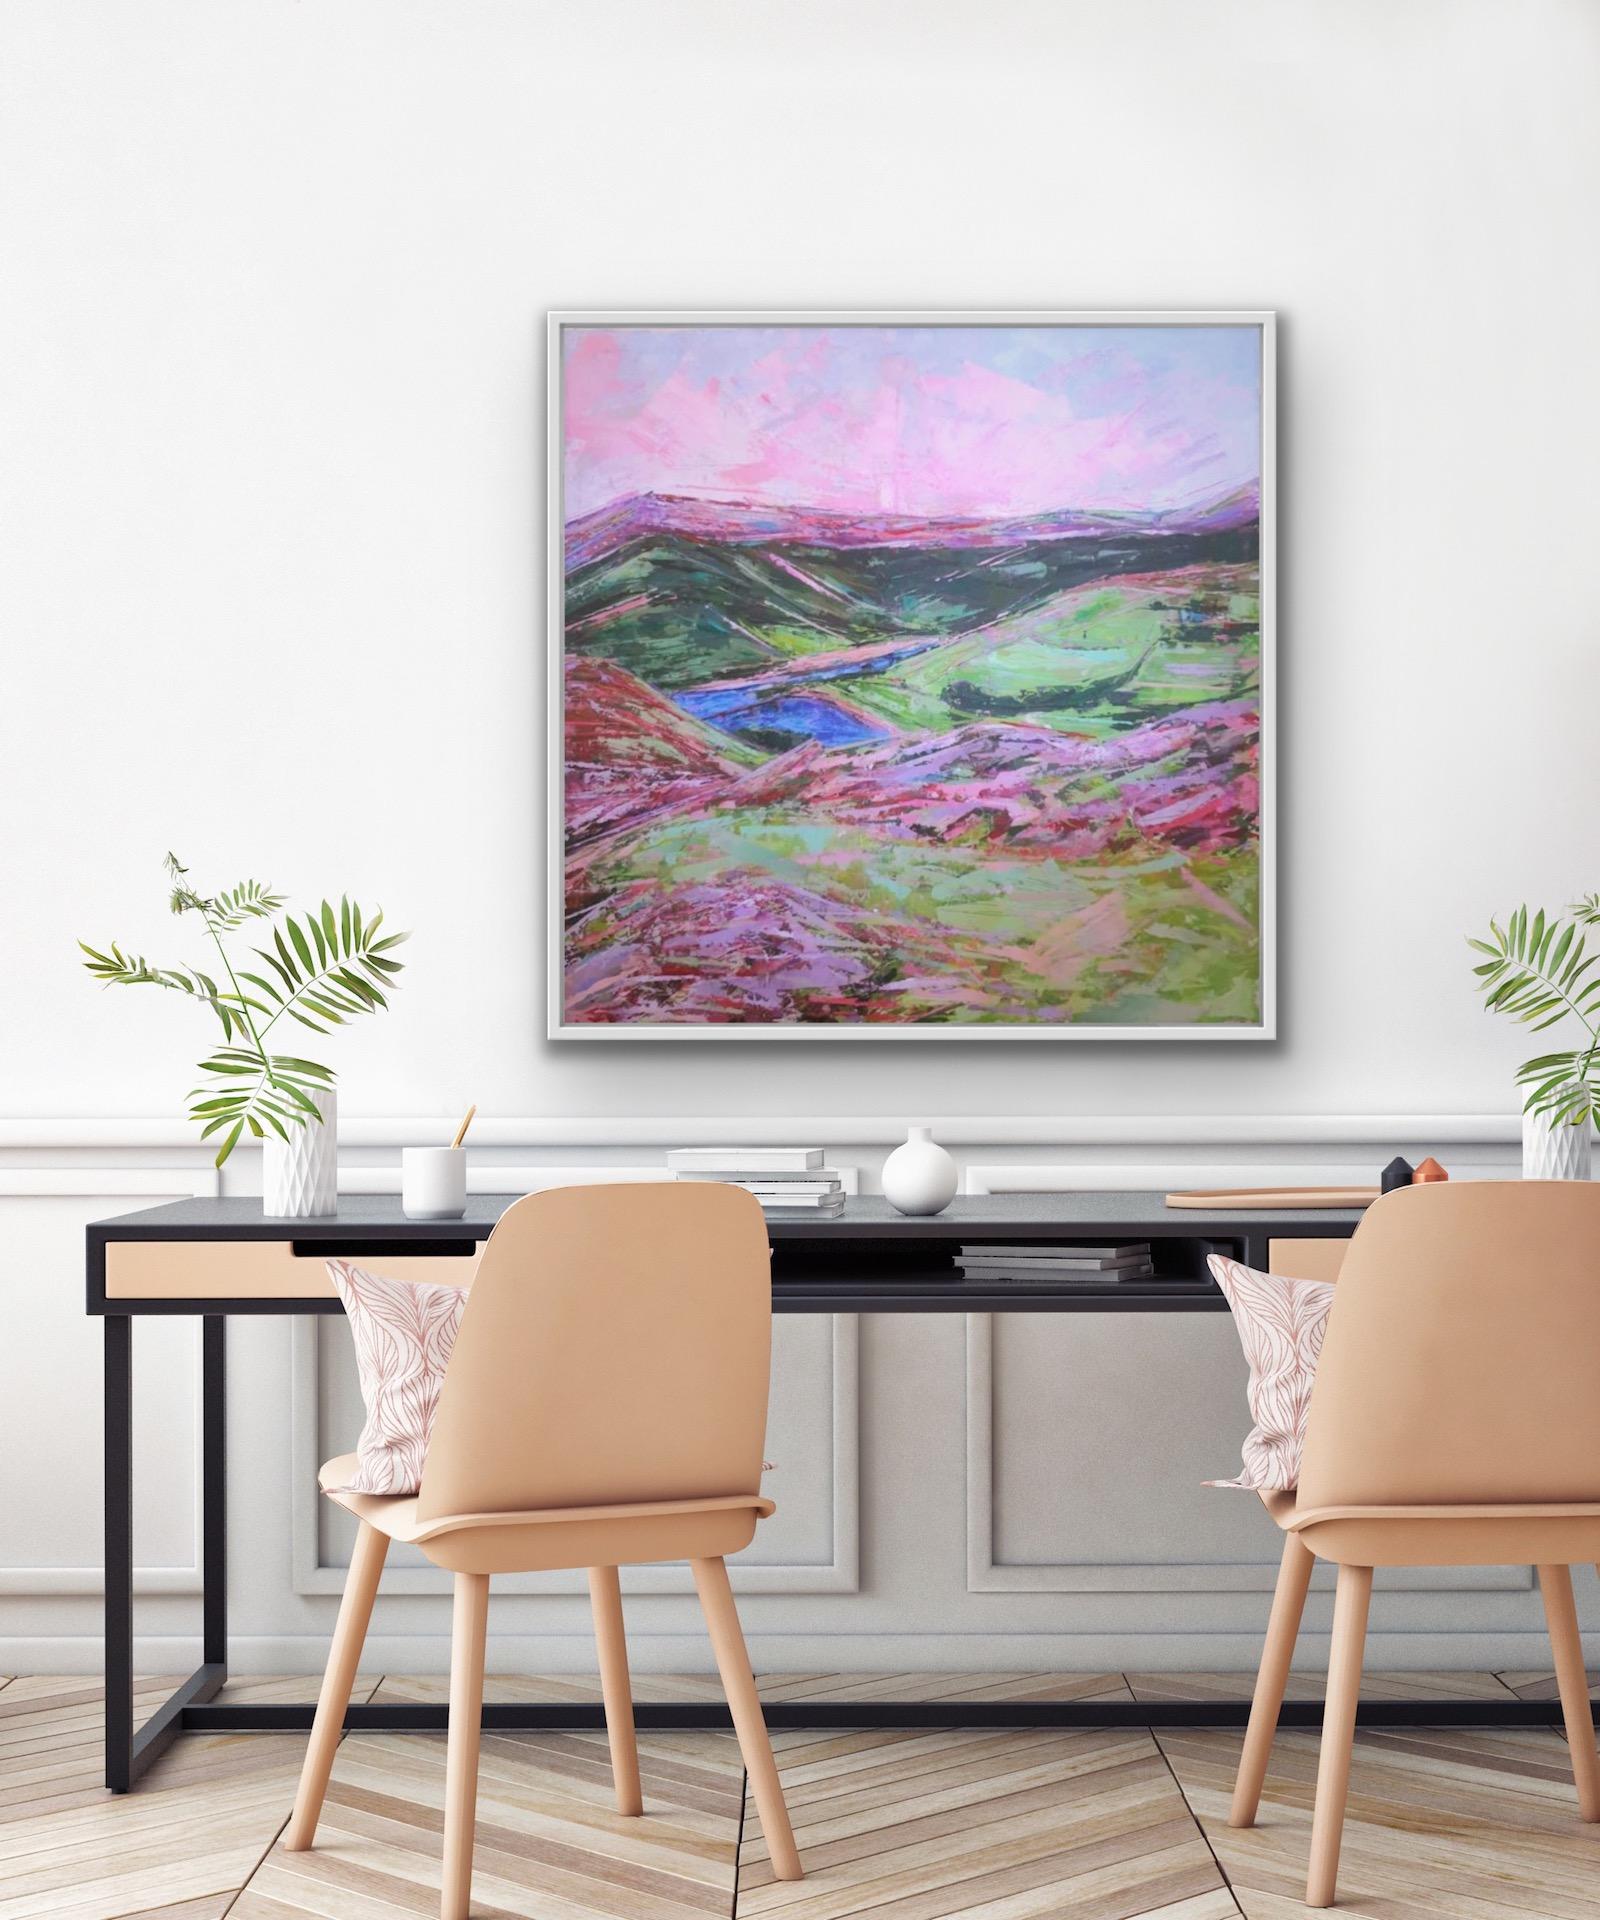 Charmaine Chaudry, Lake District, Contemporary Landscape Art, Affordable Art For Sale 1